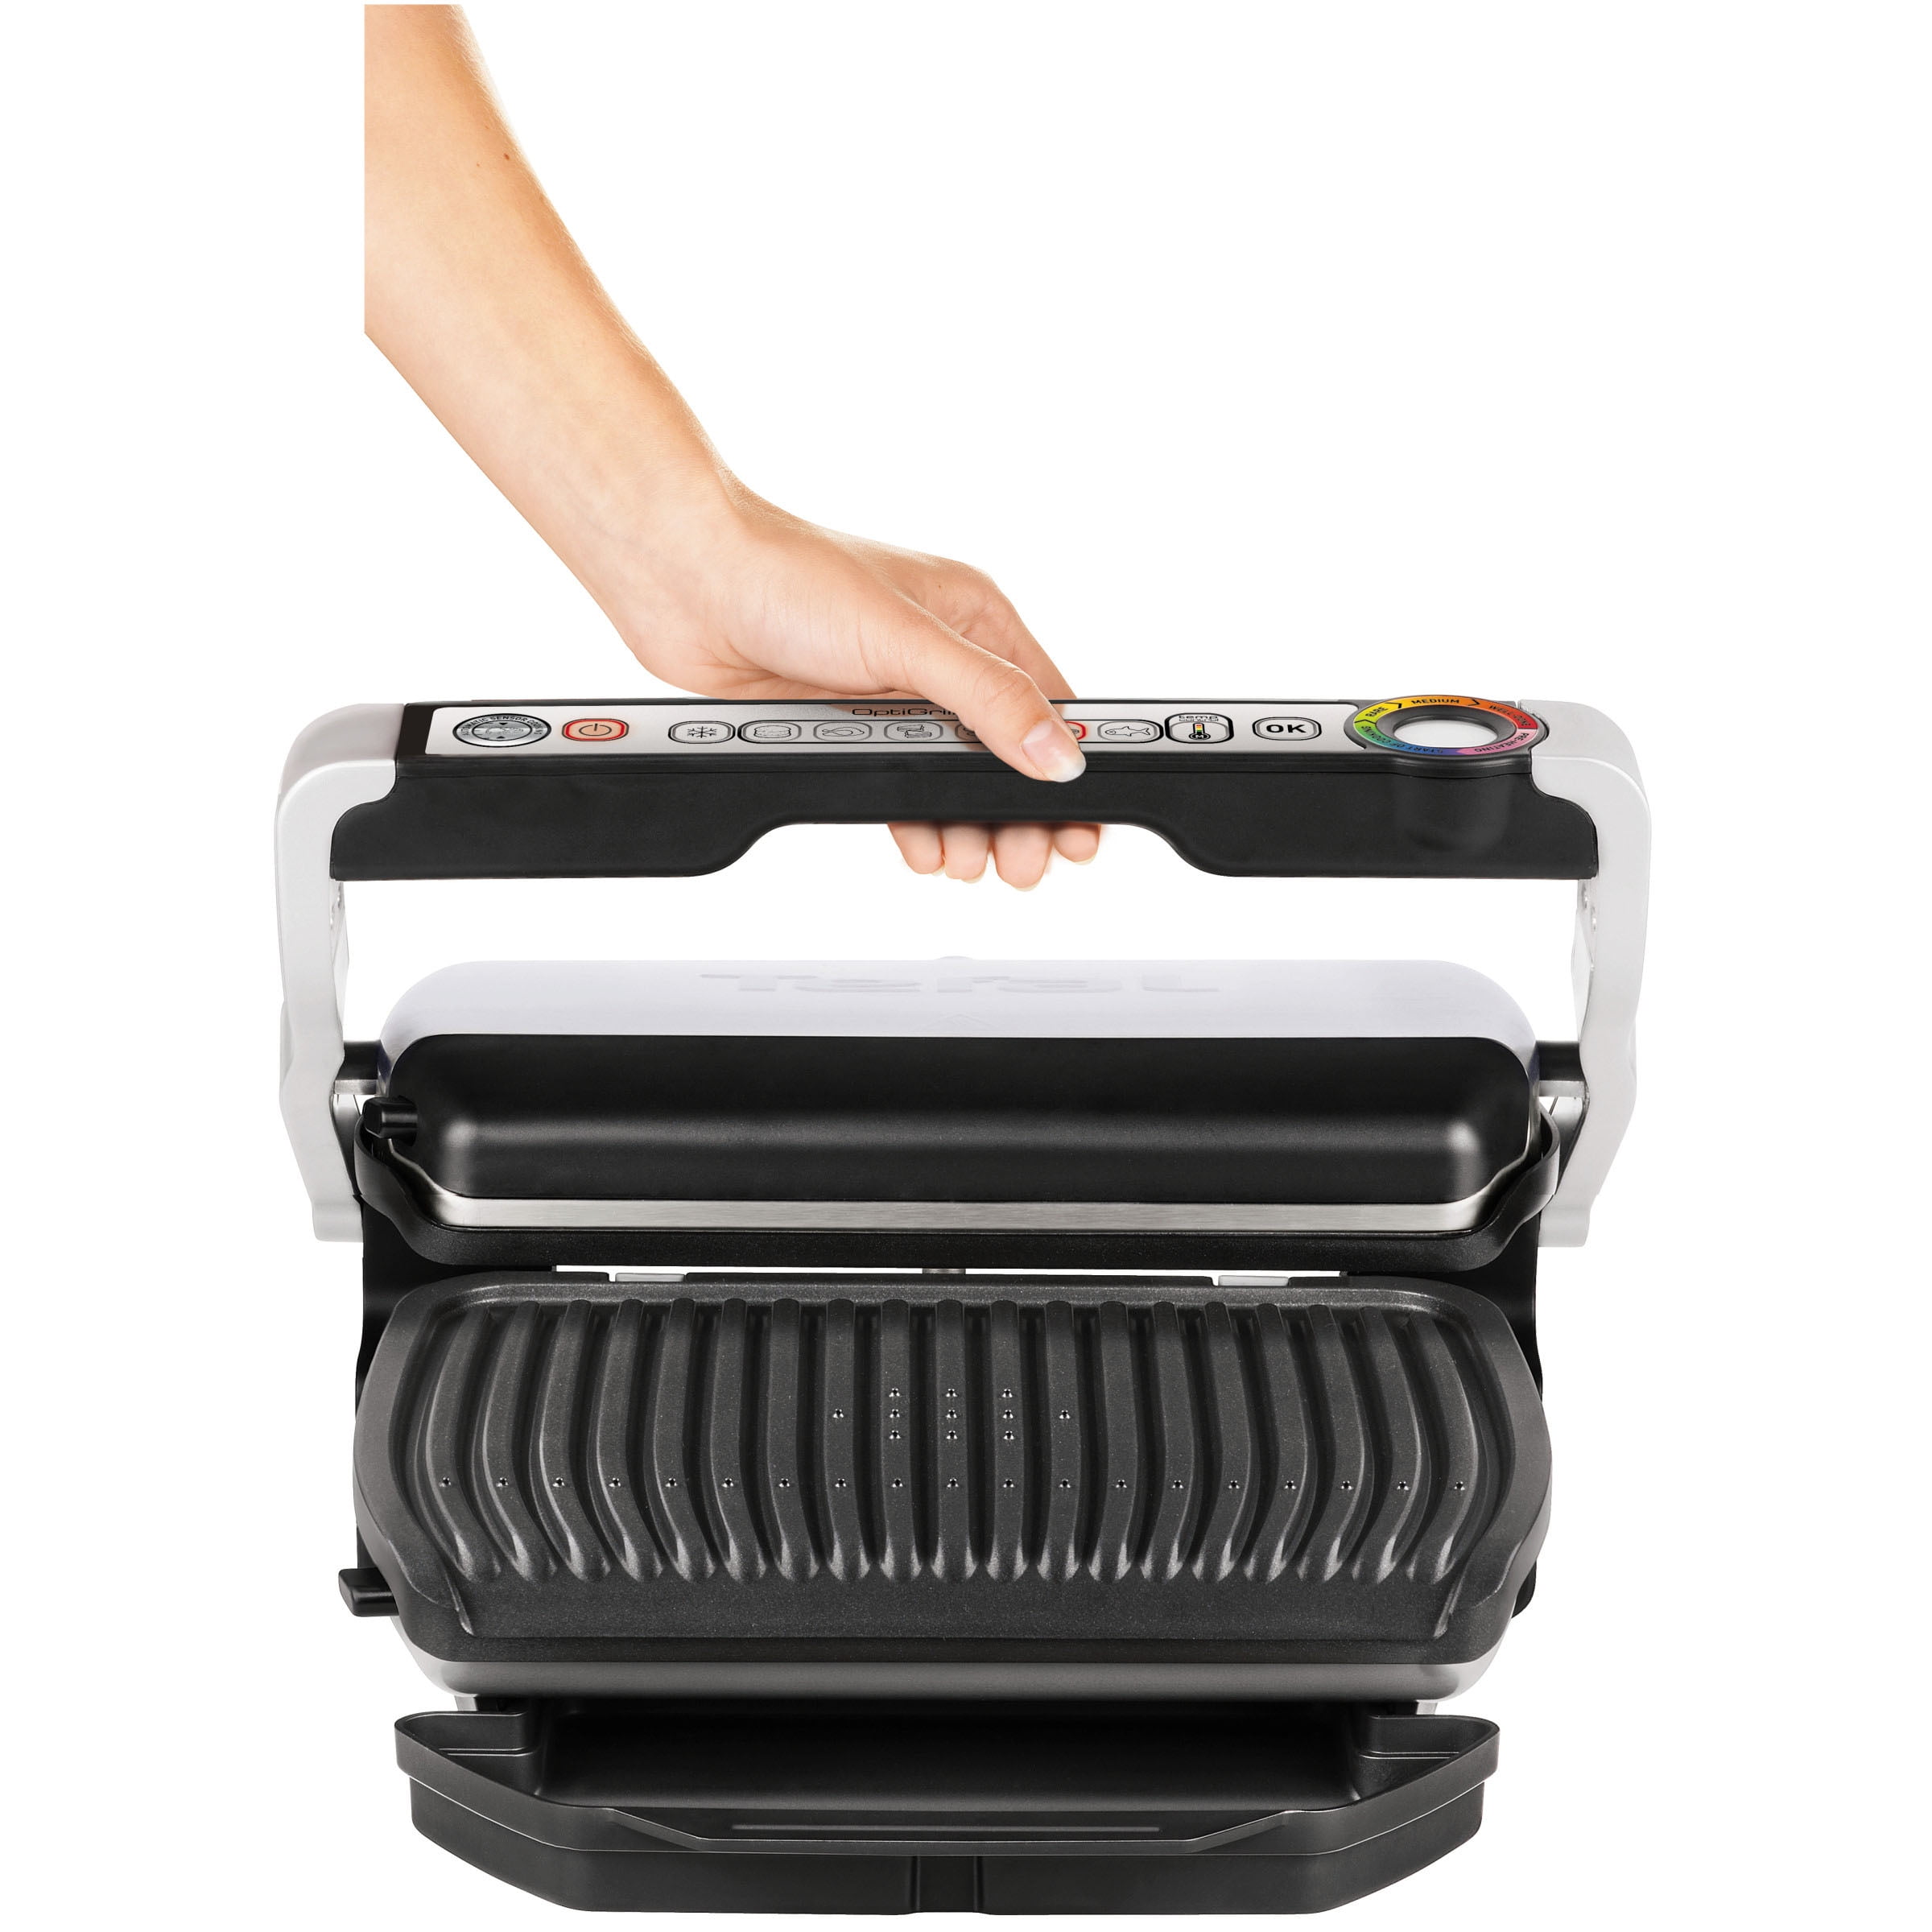 OptiGrill Indoor Electric Grill with Removable, Dishwasher Safe Nonstick Plates, GC712D54 -